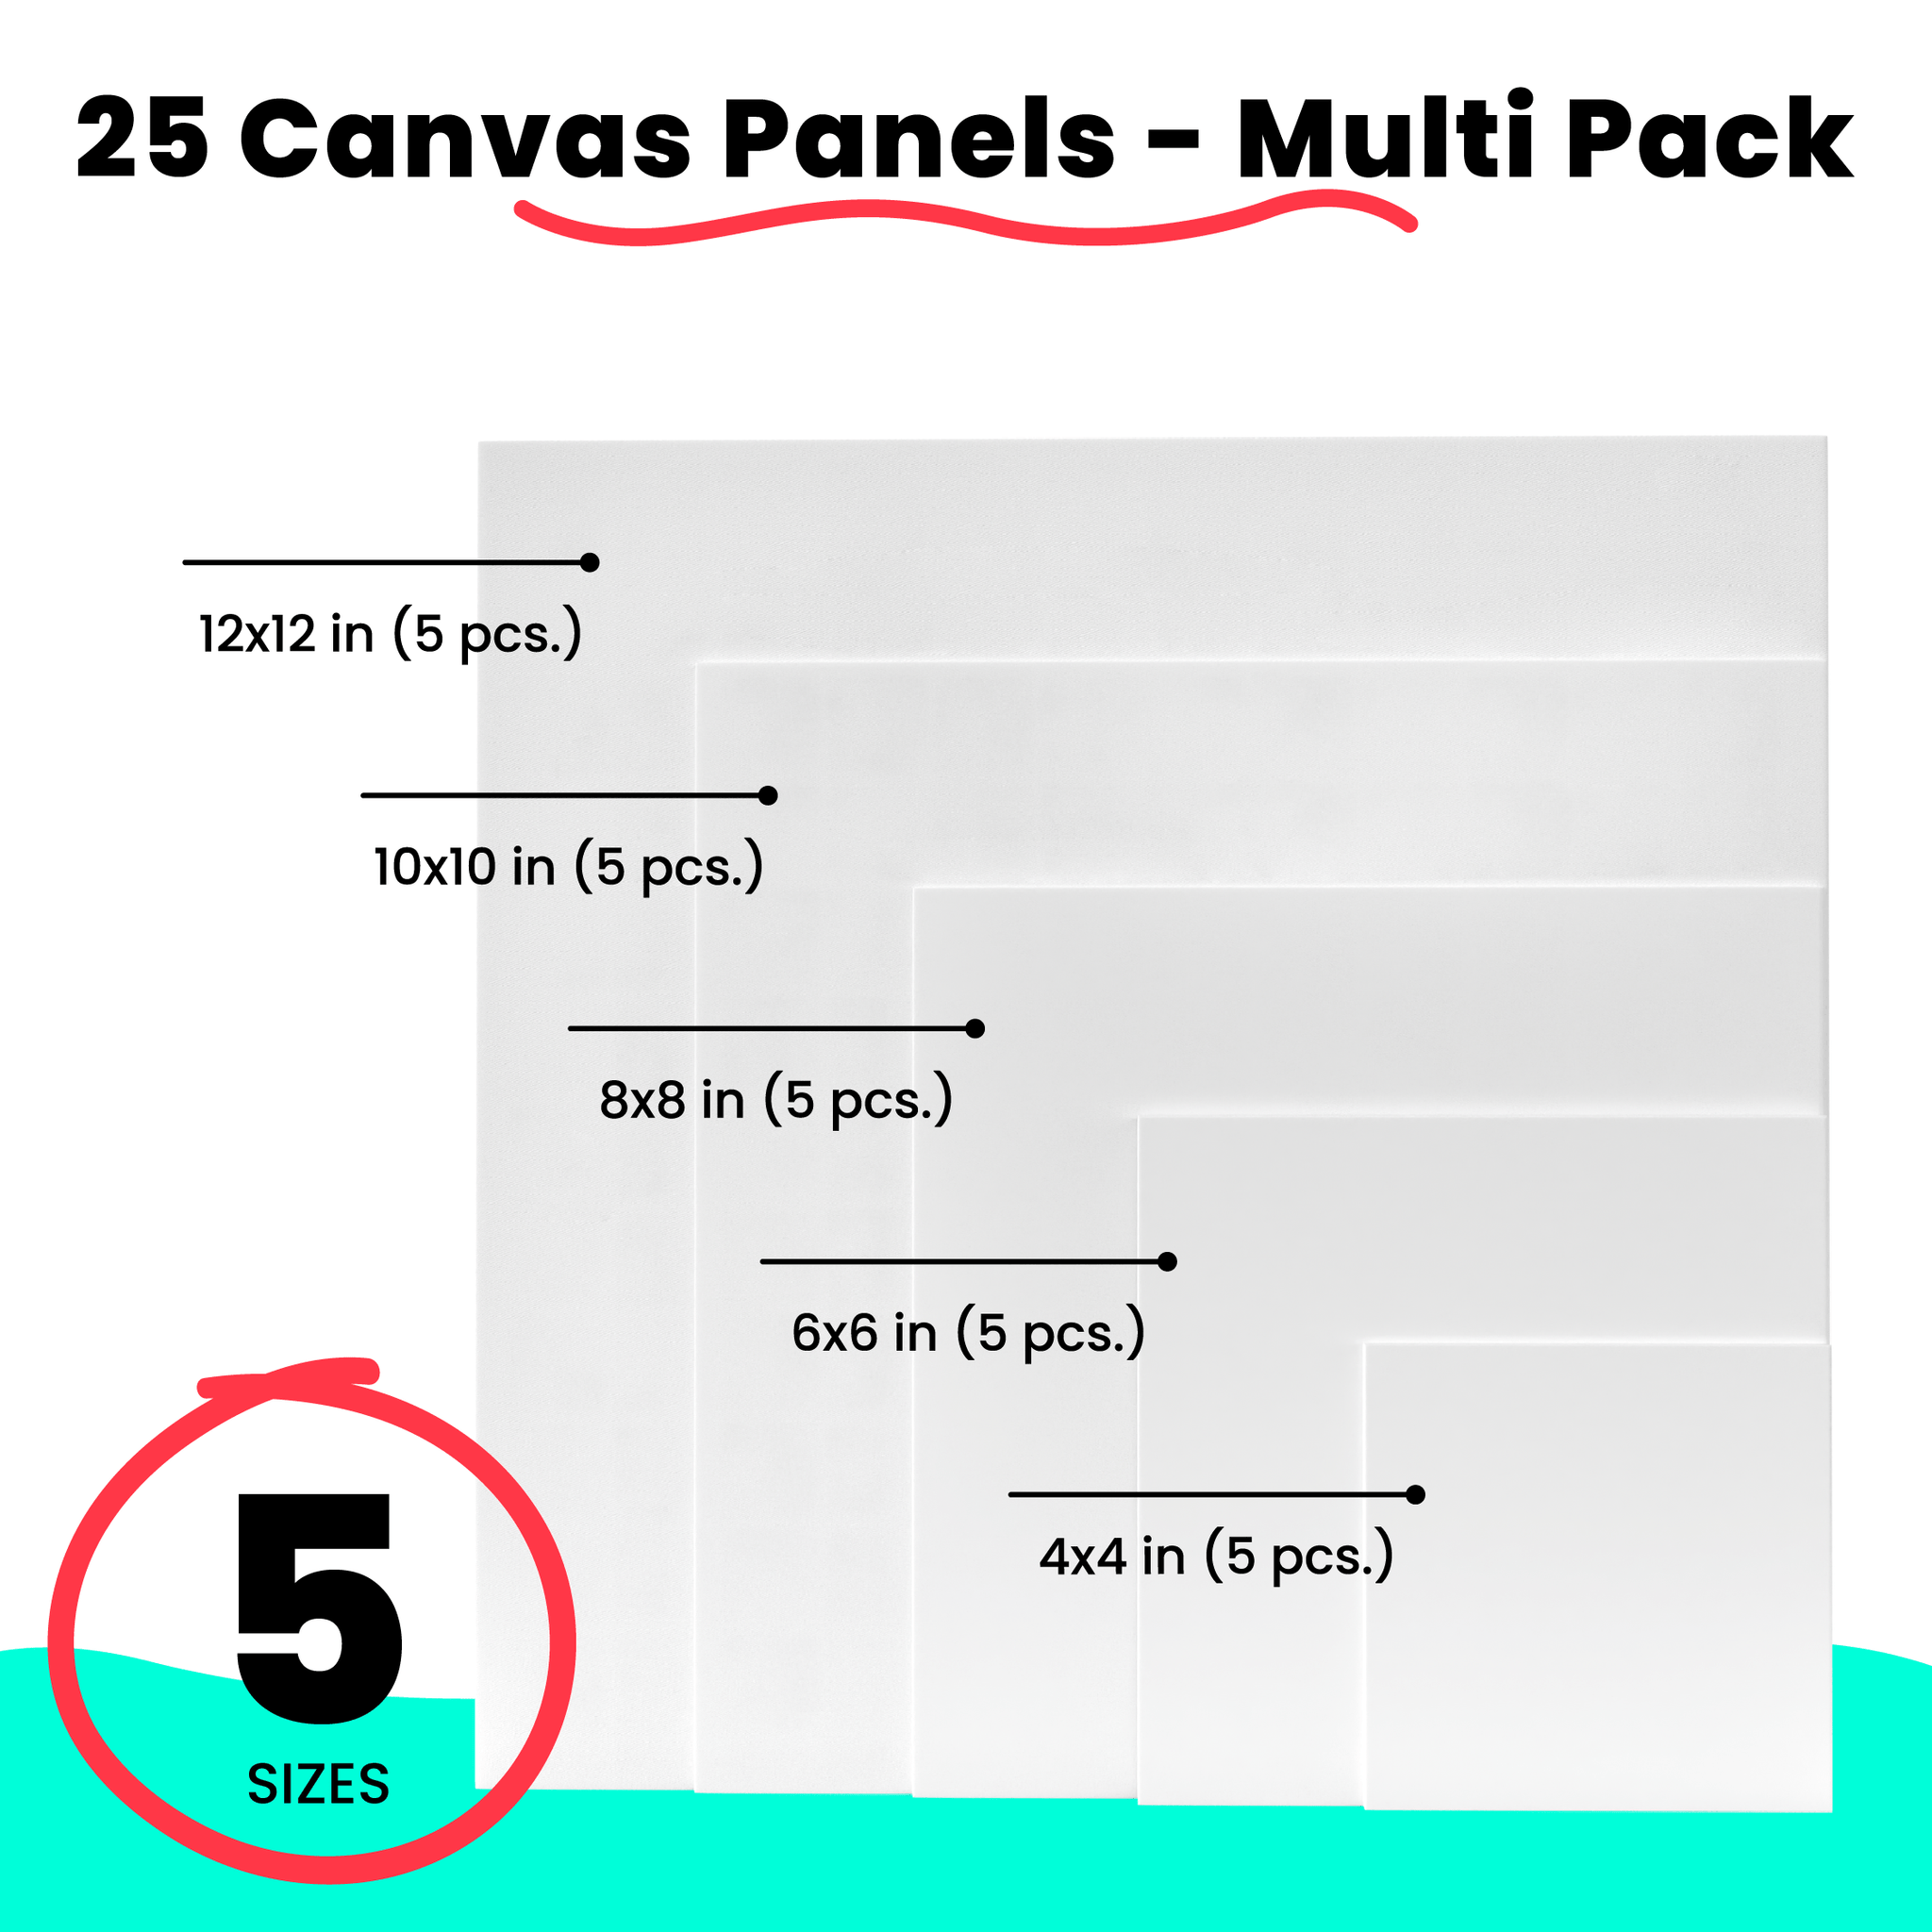 Square Stretched Canvas Multi-Pack - 4x4, 6x6, 8x8, 10x10, 12x12